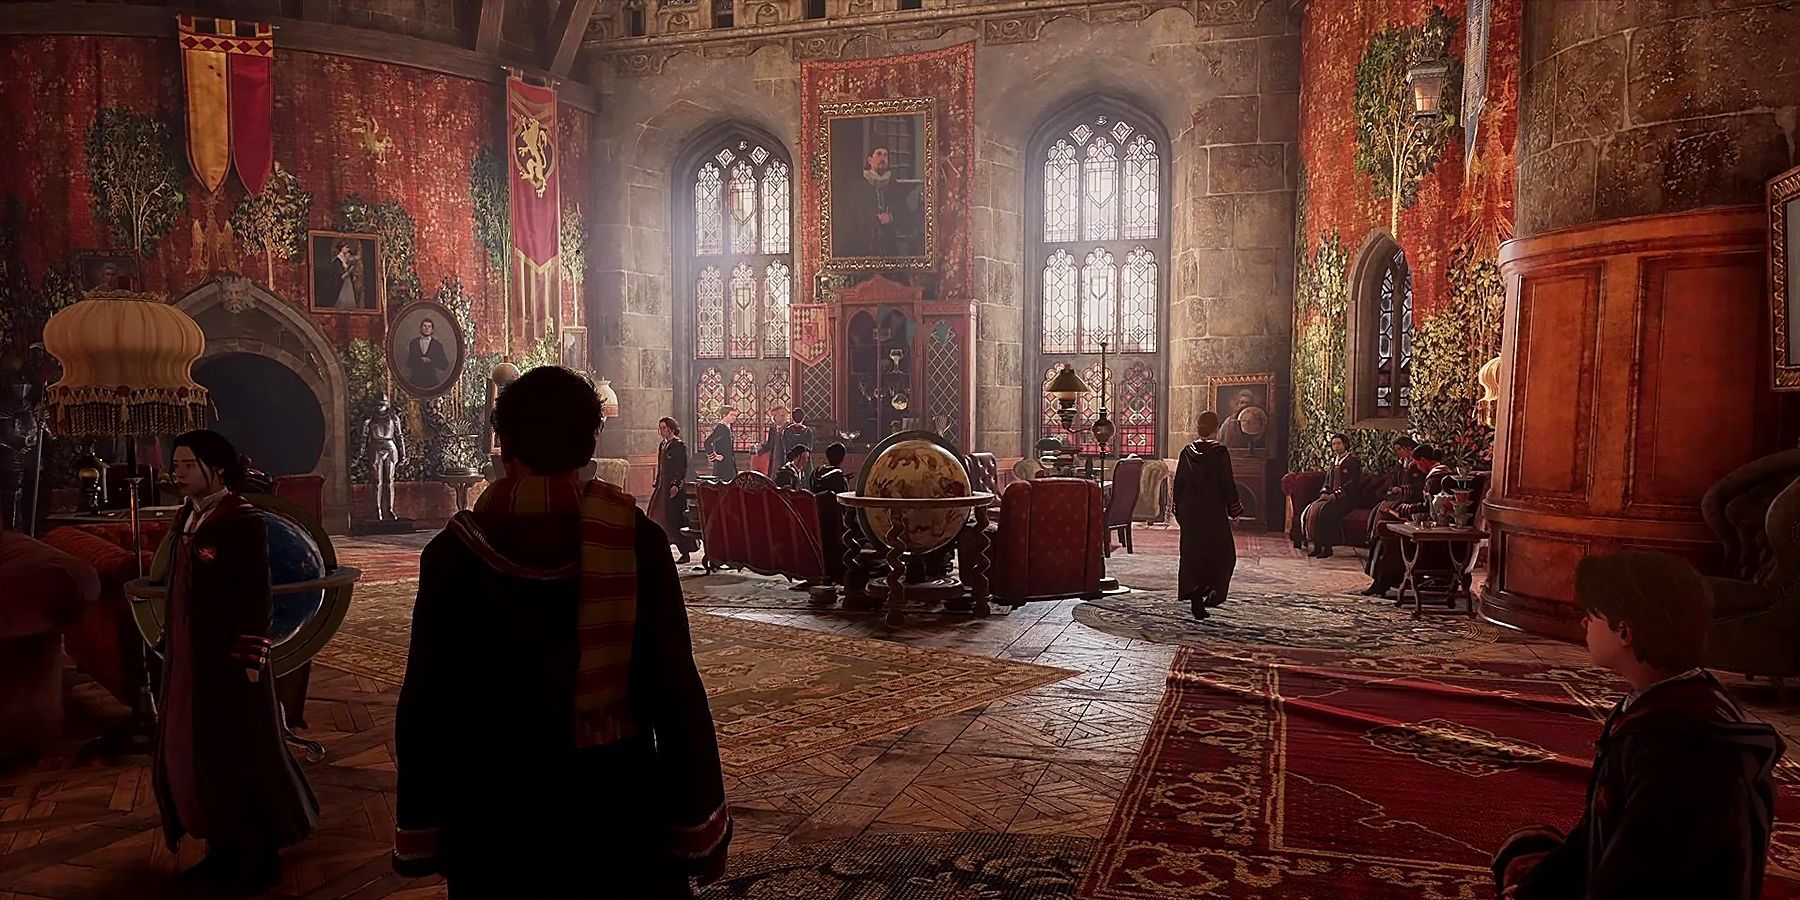 Hogwarts Legacy Player Points Out Plot Hole With The Castle's Beds - GameRant